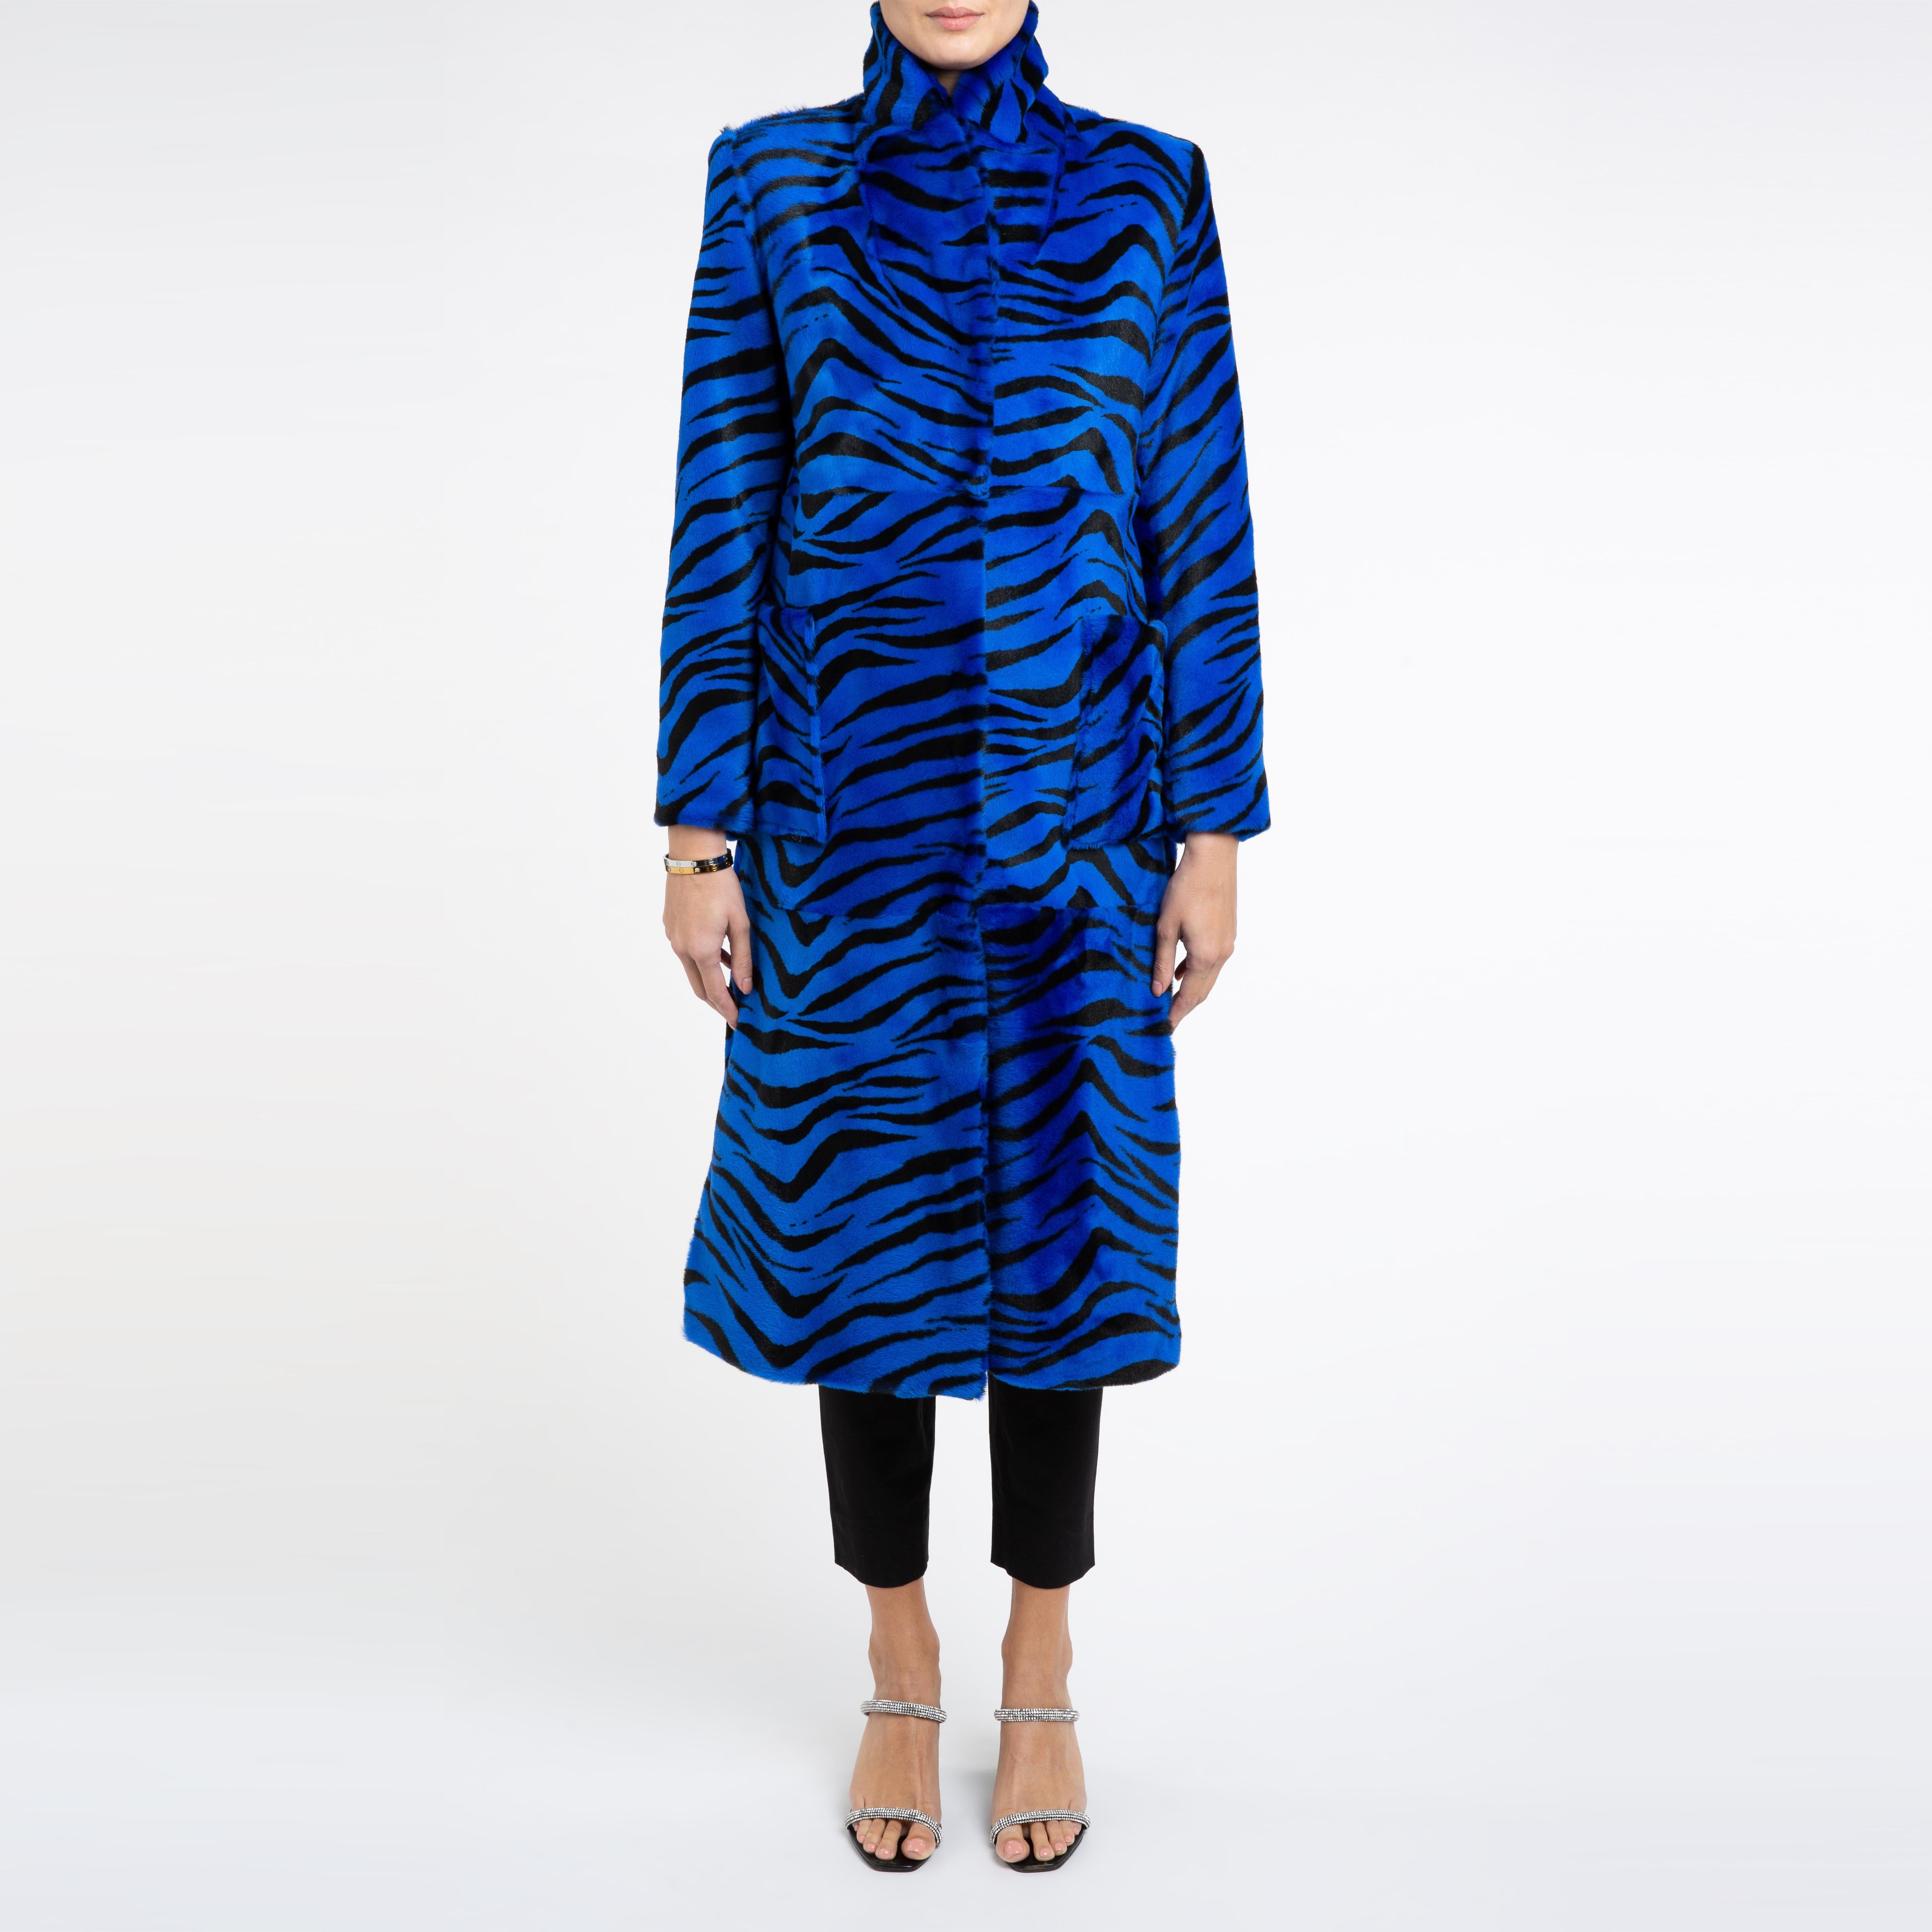 Verheyen London Shearling Coat in Blue Zebra Print size uk 8-10

A coat for dressing up and down with jeans or a dress and to keep you cosy for the cold weather. 
This longline design is flattering and easy to wear with jumpers etc with its relaxed